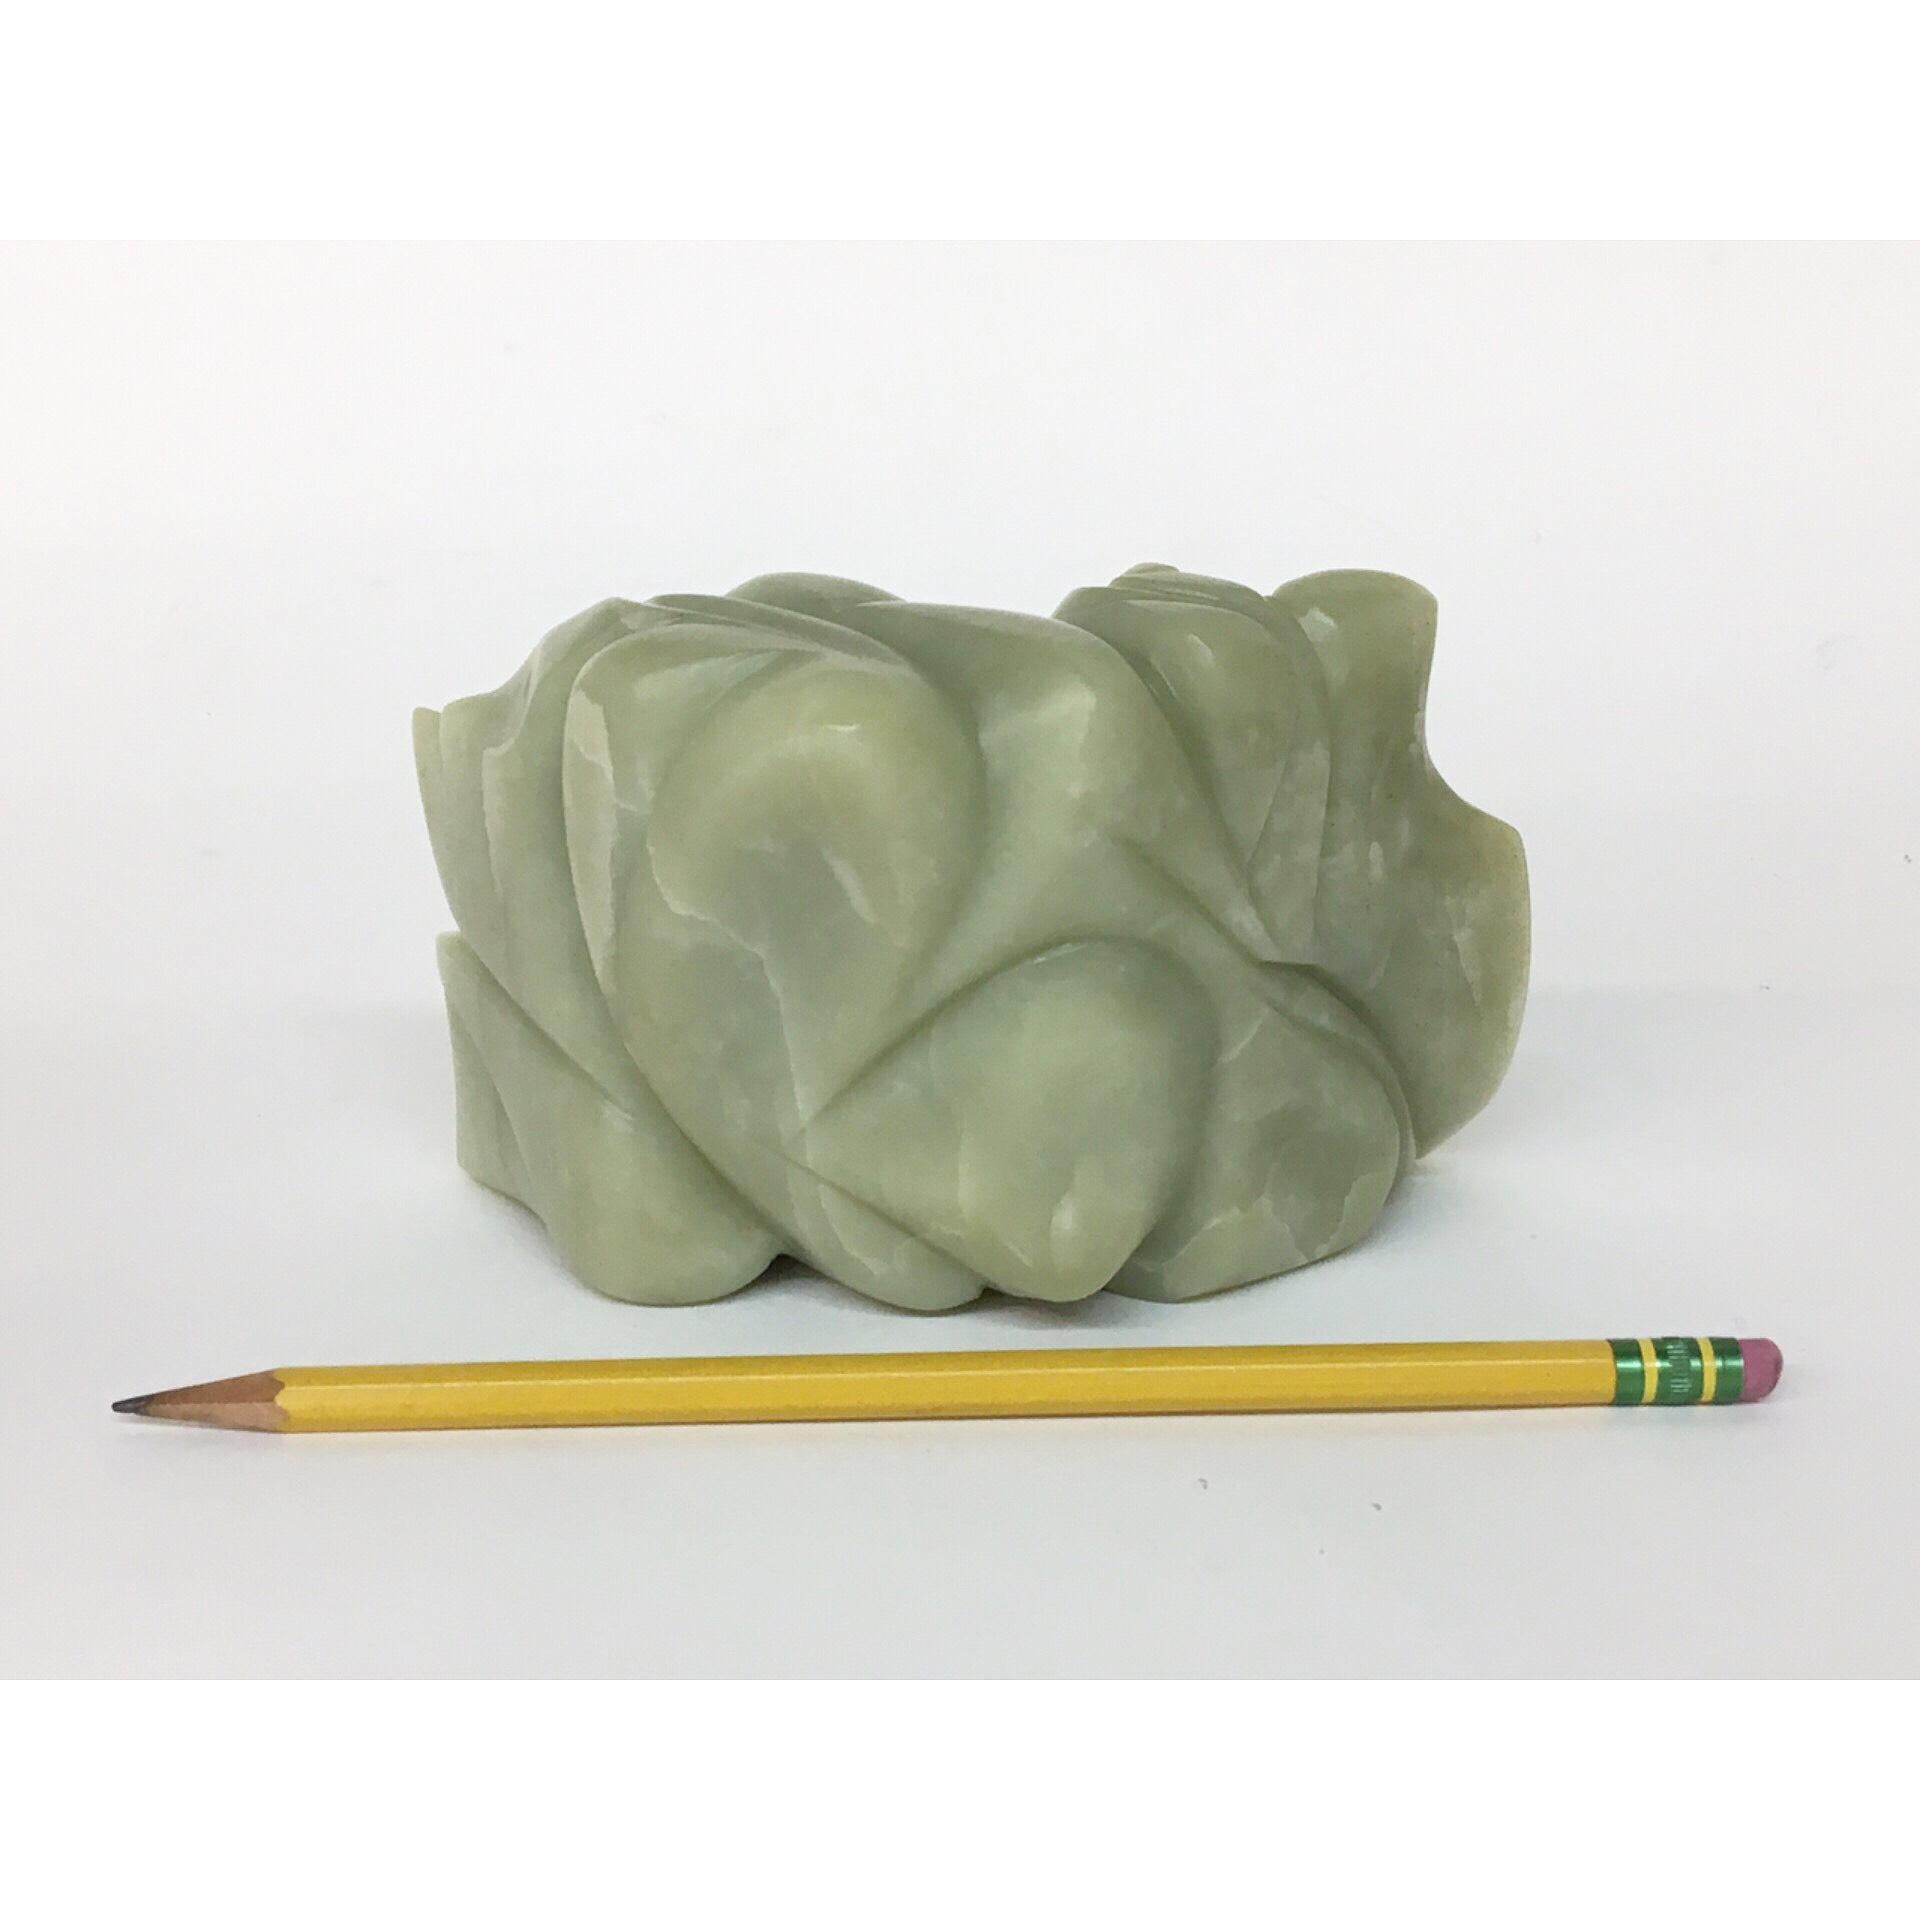 TANGLE Soapstone Sculpture 6 1/2 × 4 × 3 inch by Melanie Newcombe 3